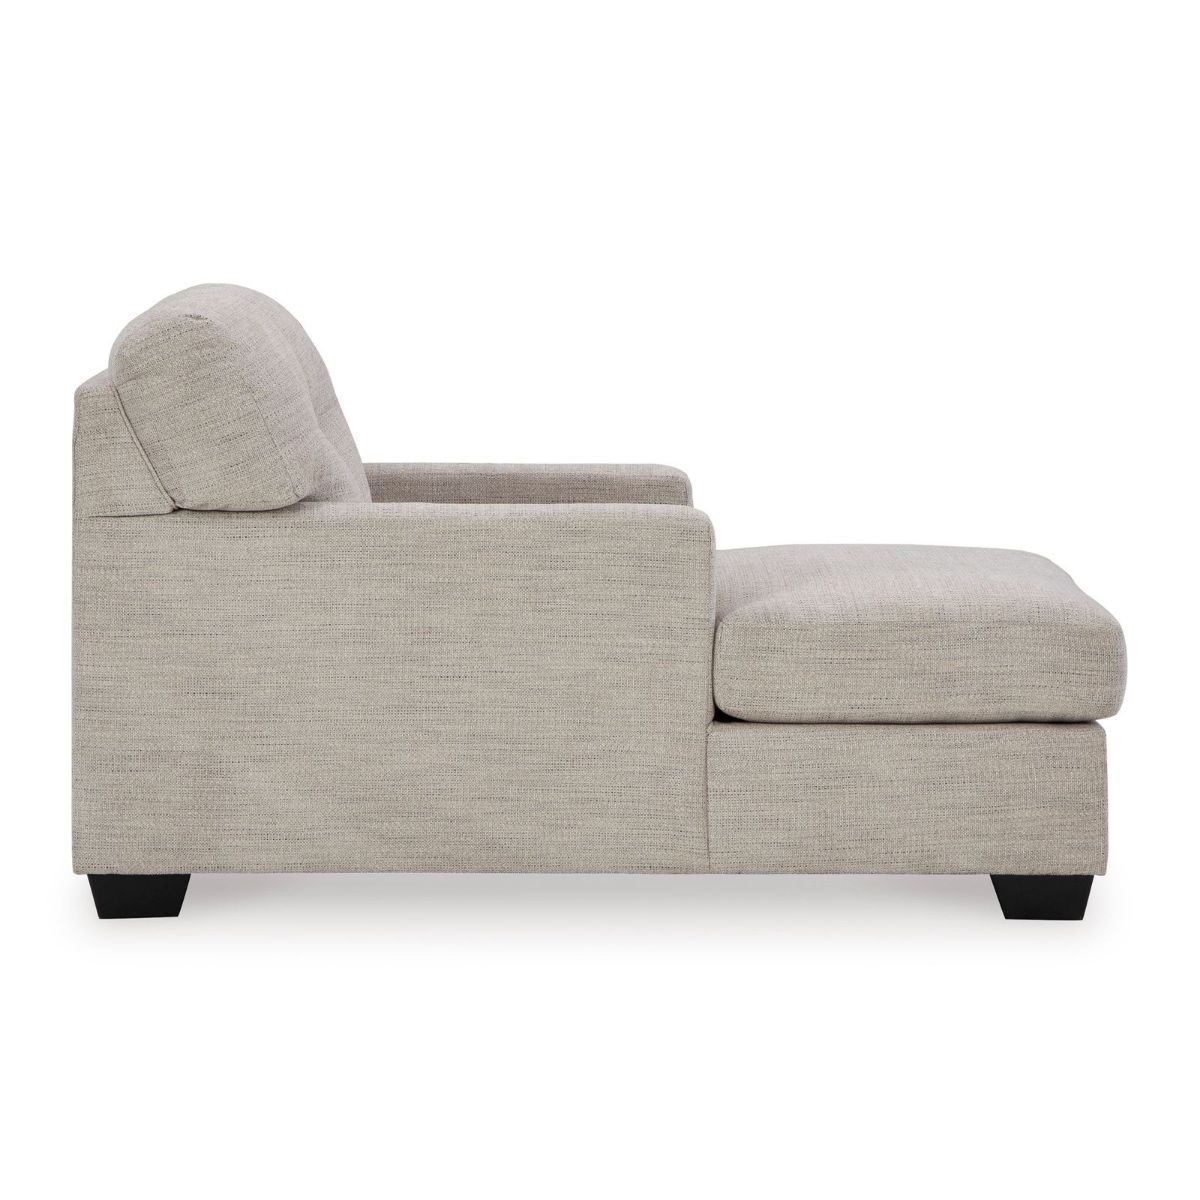 Picture of Mahoney Pebble Chaise